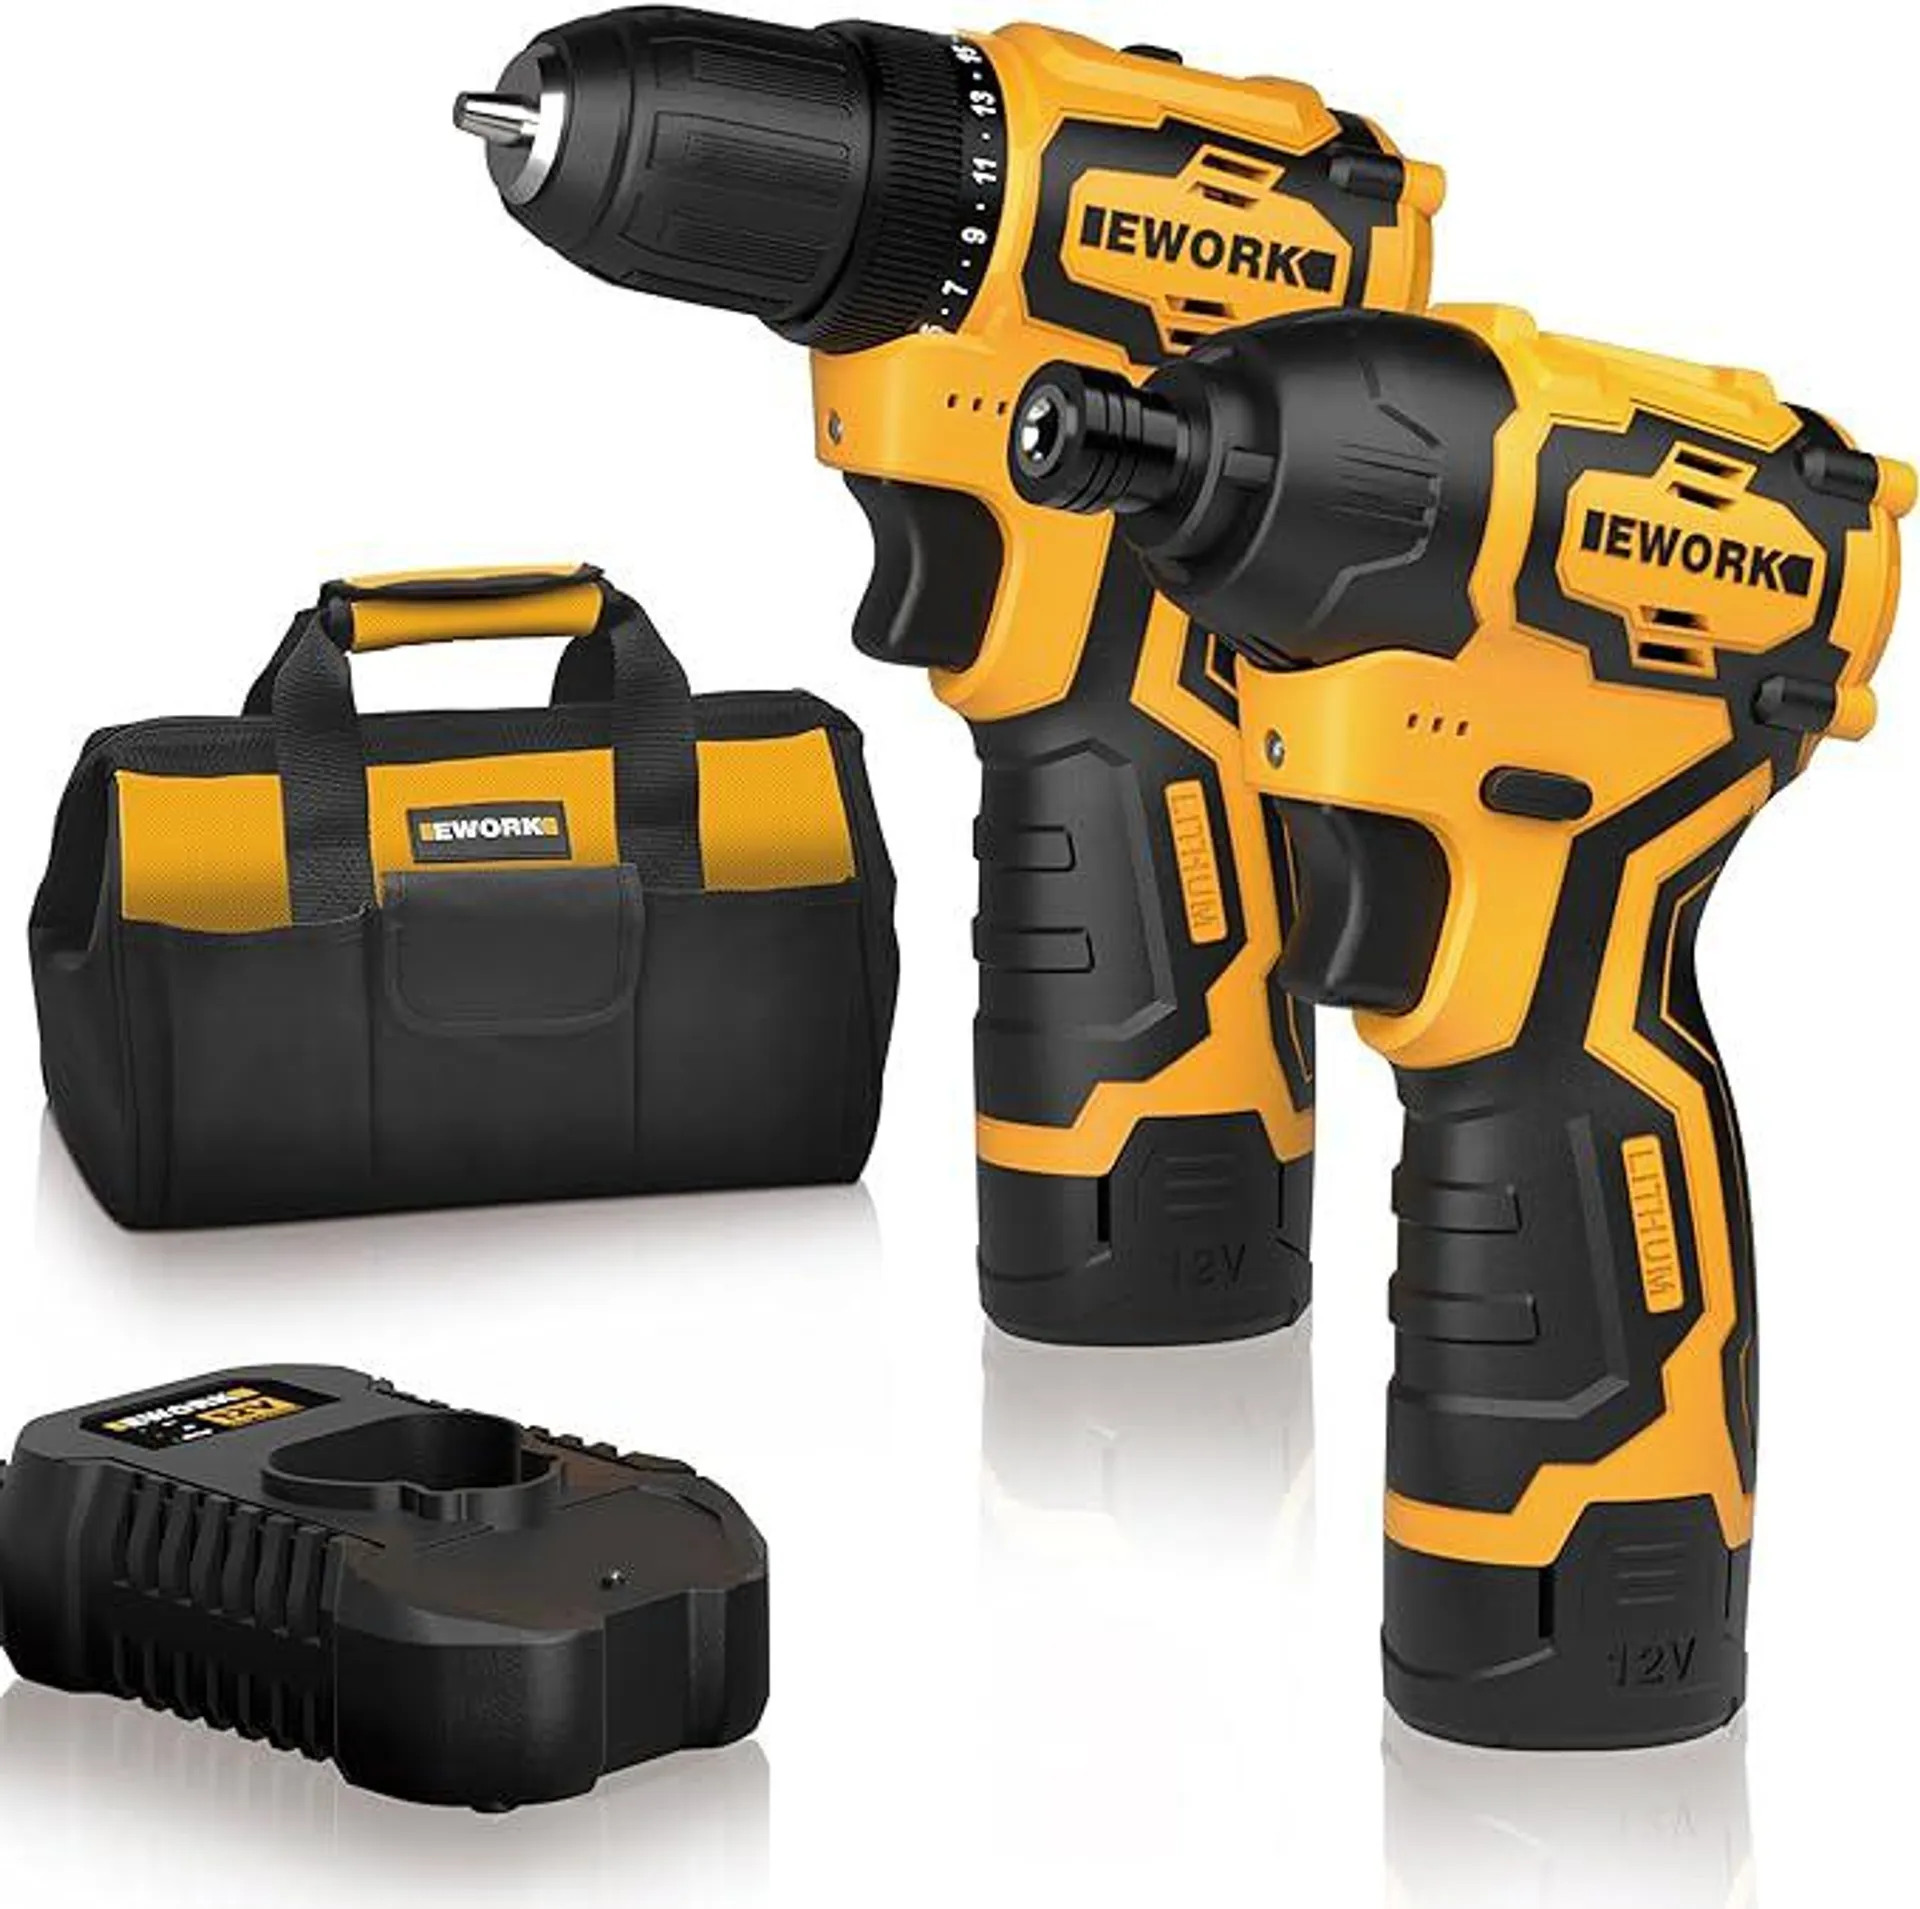 EWORK 12V Brushless Impact Driver and Cordless Drill Set, Compact Power Tool Combo Kits, High Torque Small Electric Drill Driver with (2) 2.0Ah Battery, Fast Charger, Tool Bag, Built-in LED